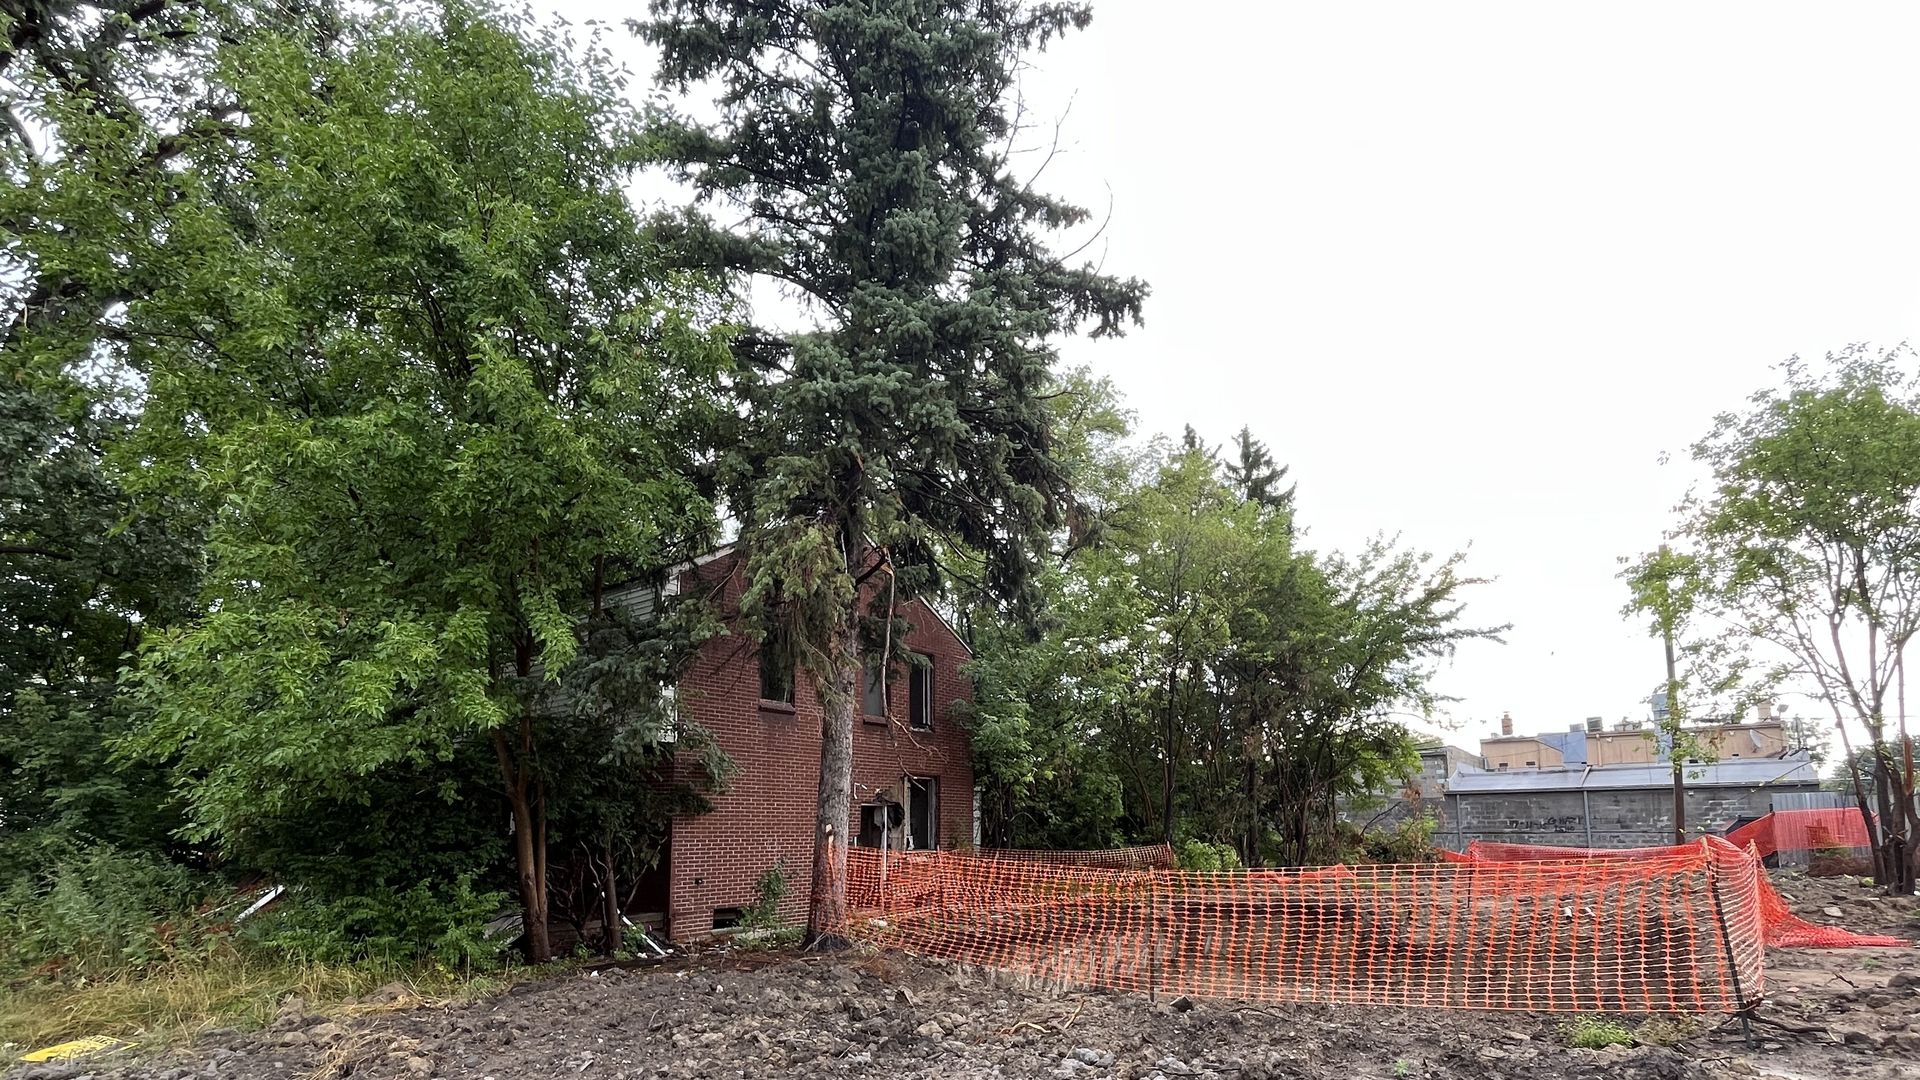 A home is shown hidden among trees, with a caution fence around its yard. Lots of dirt in the foreground.